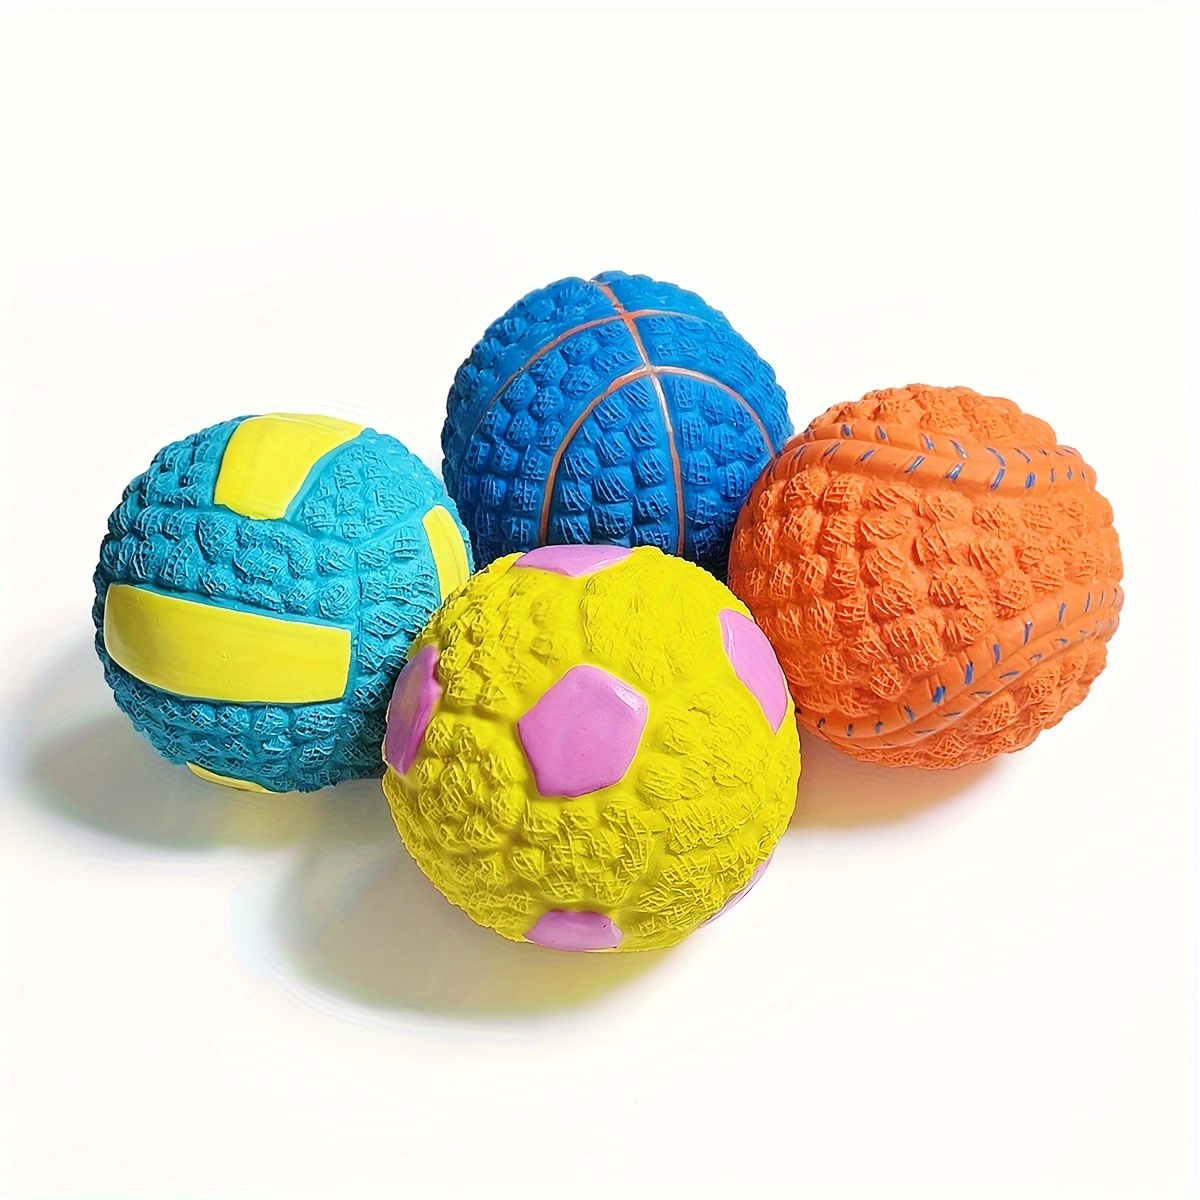 

Llspet Squeaky Dog Balls - Interactive Latex Rubber Squeak Toys For Small Dogs Puppies - 2.6" Soft Bouncy Fetch Play Ball - Natural Rubber, Non-toxic, Durable - All Breed Sizes - Patterned Design